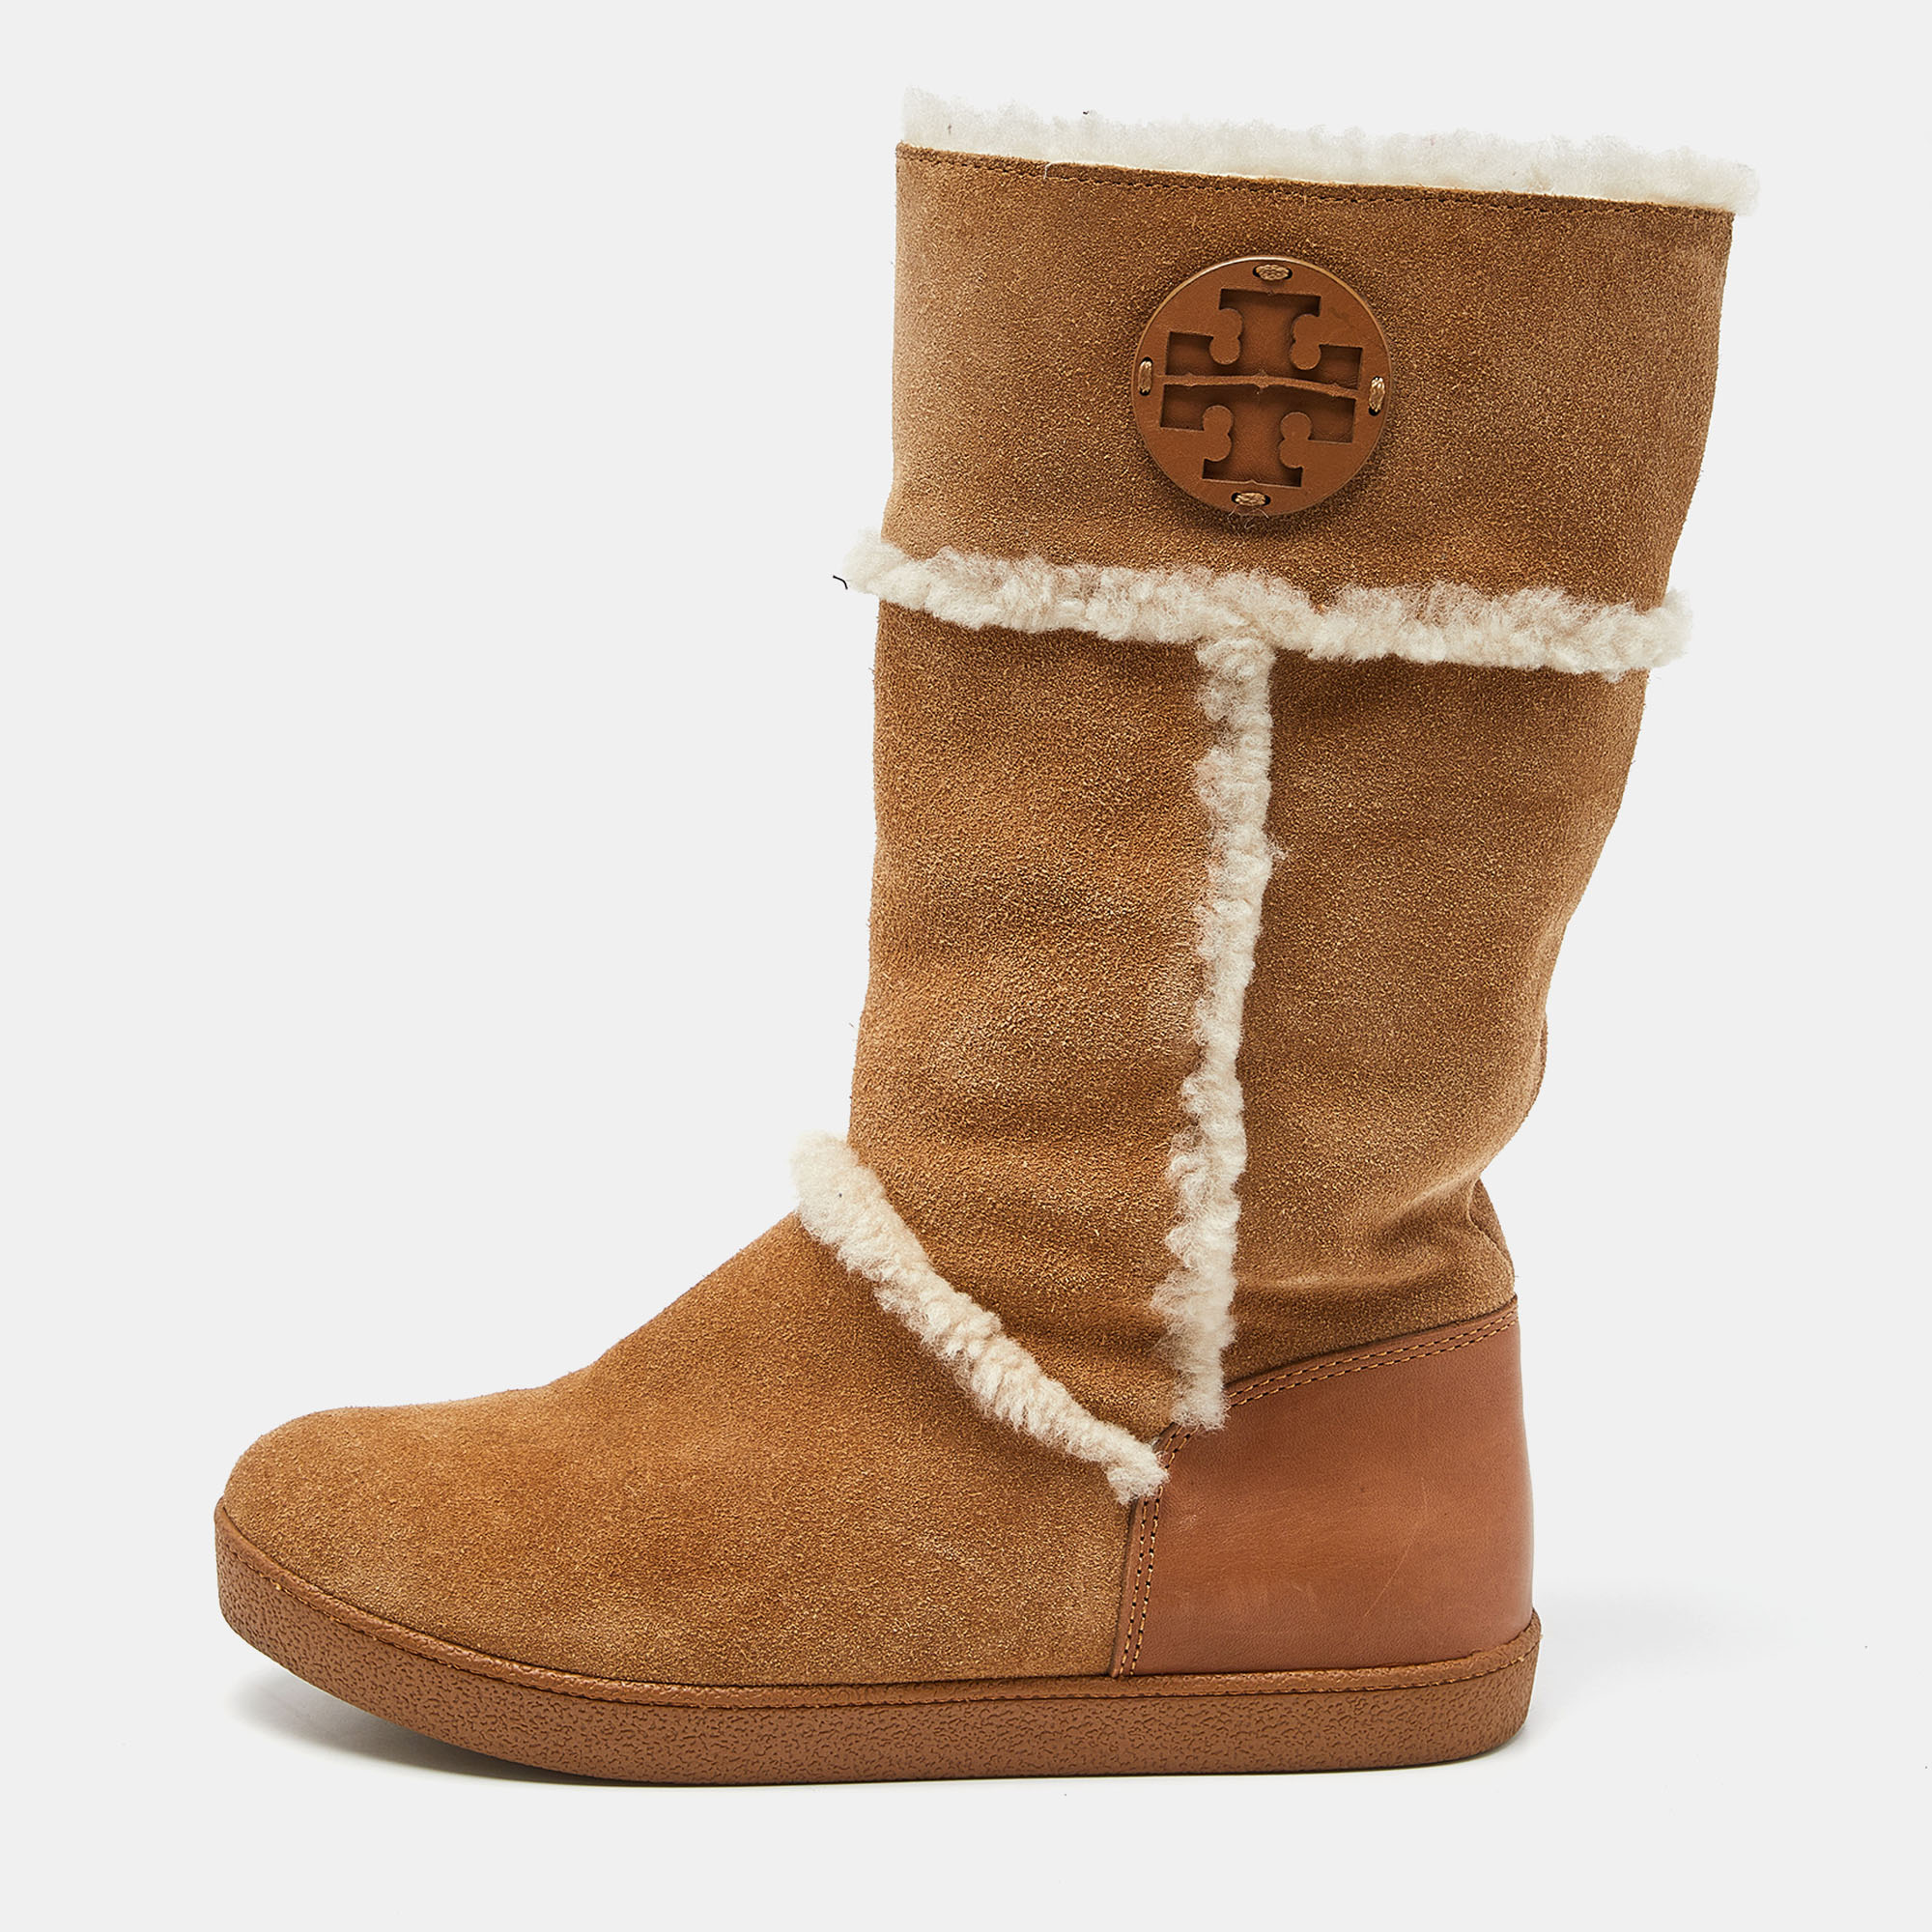 Tory Burch Brown Nubuck And Leather Snow Boots Size 38.5